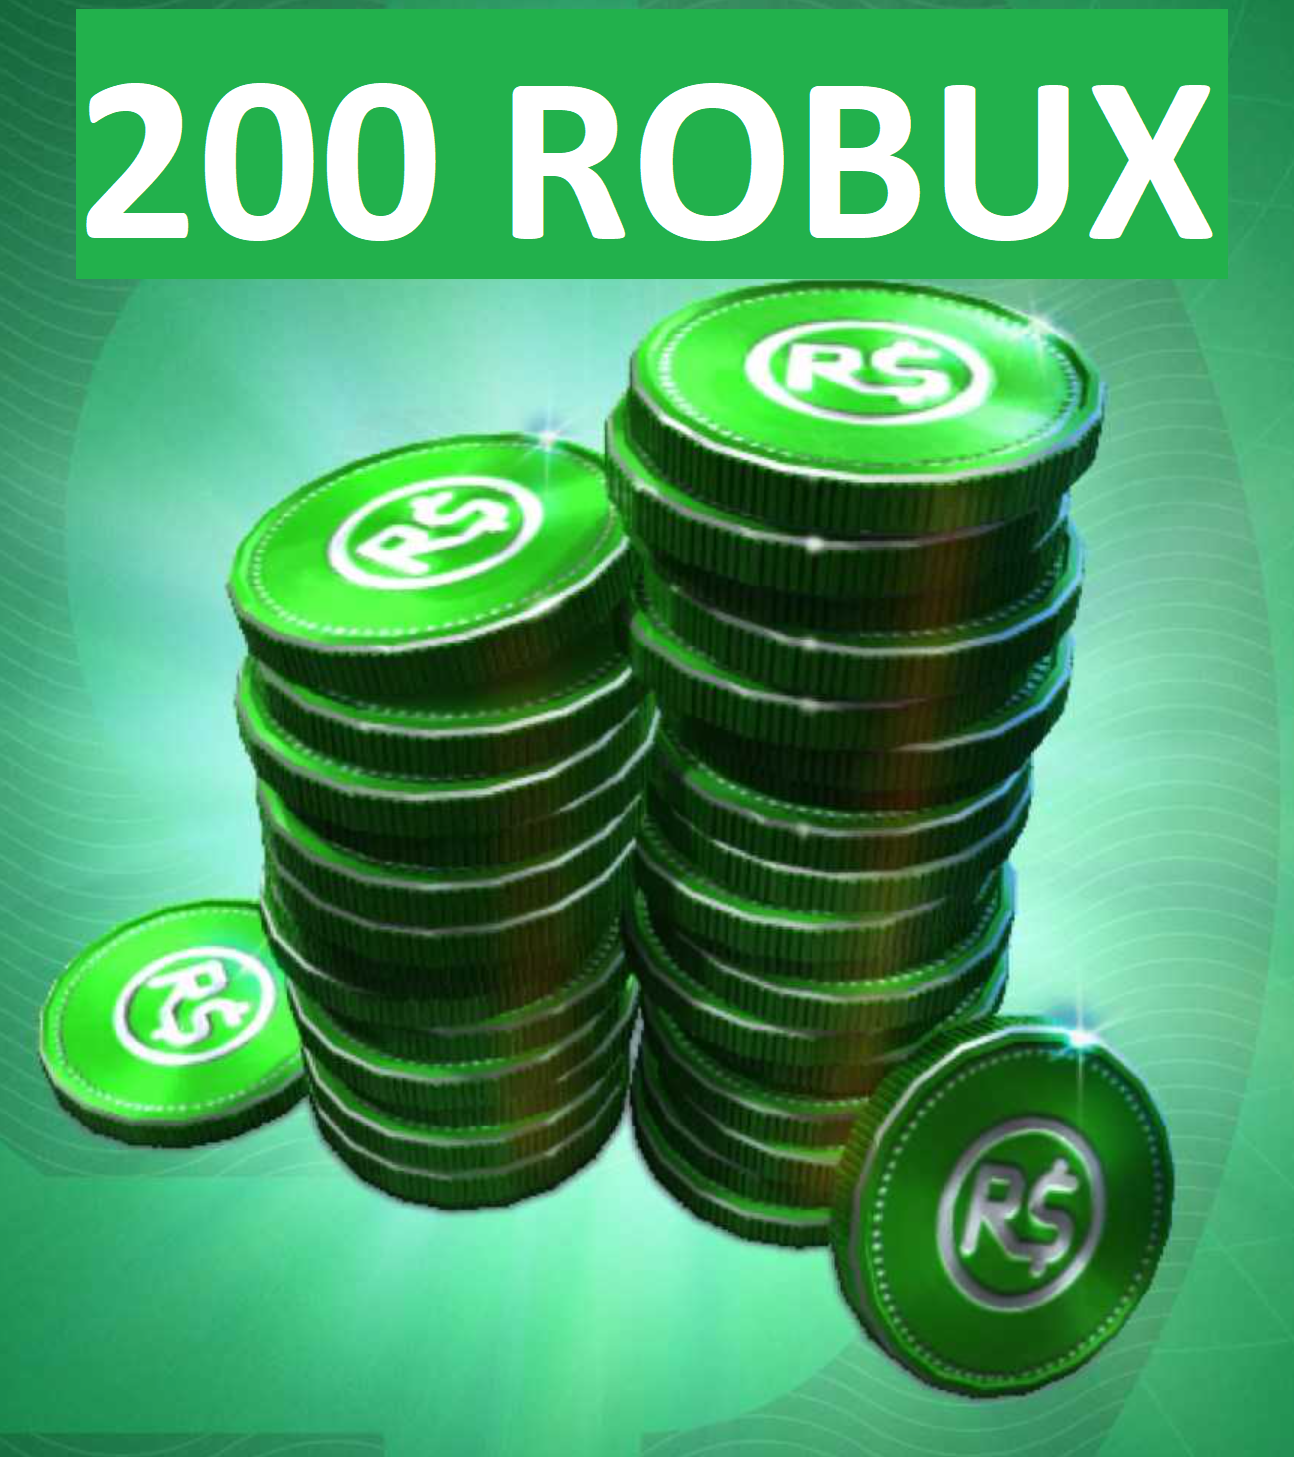 Buy Roblox Gift Card 200 Robux Global And Download - how to buy robux with itunes card on pc